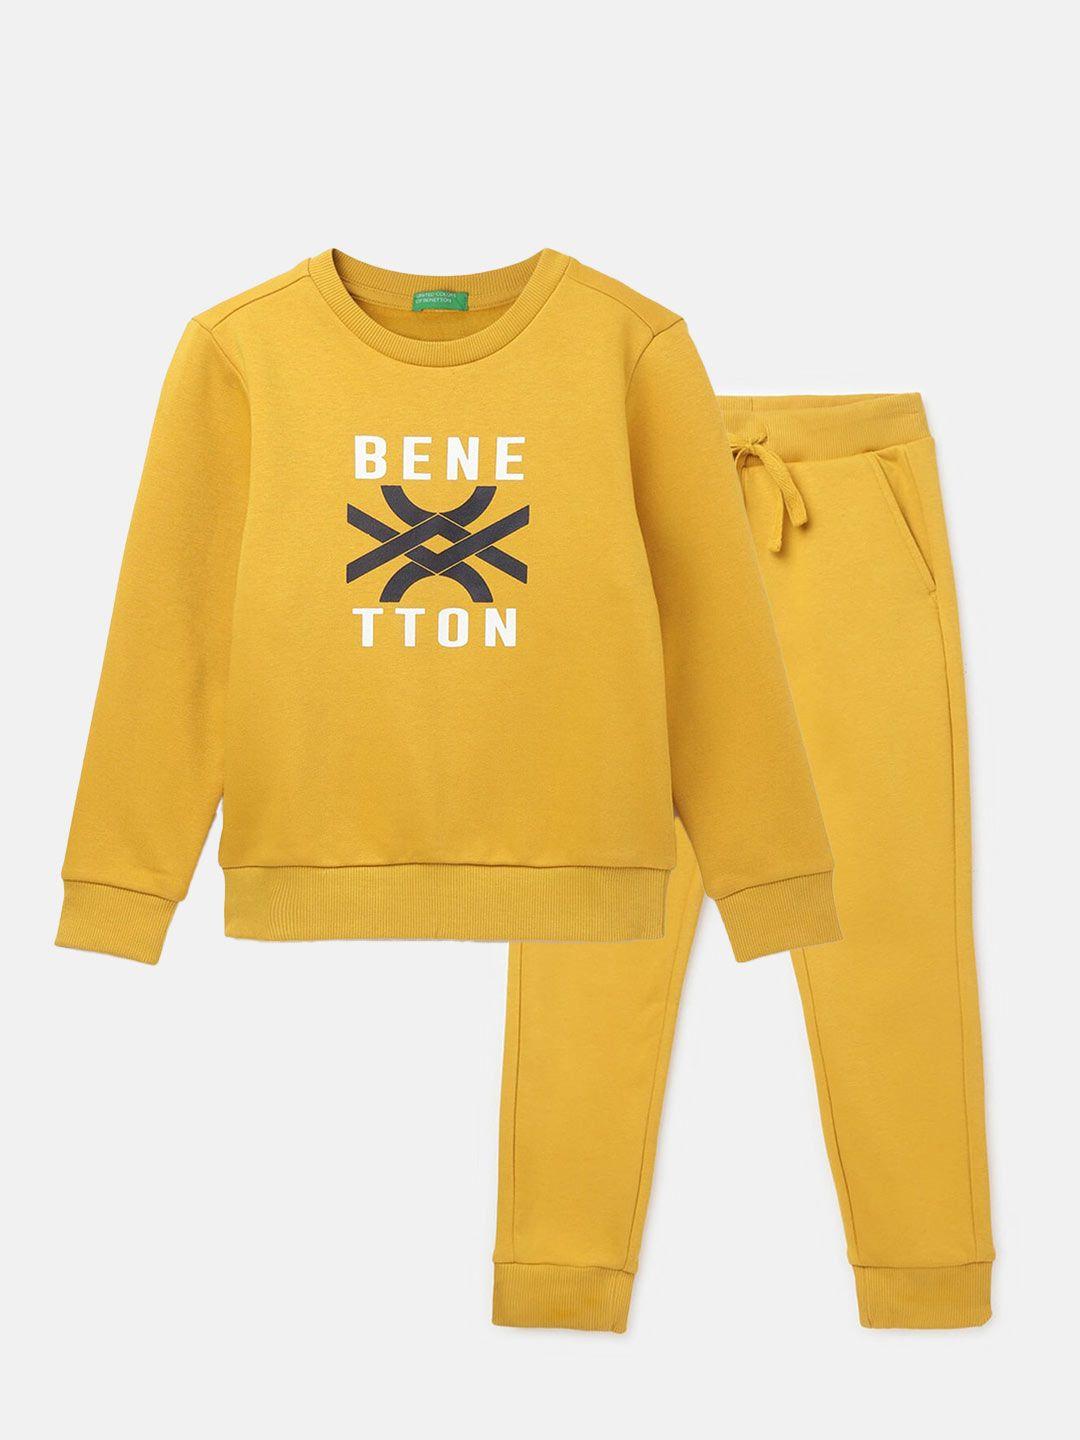 united colors of benetton boys typography printed sweatshirt and joggers